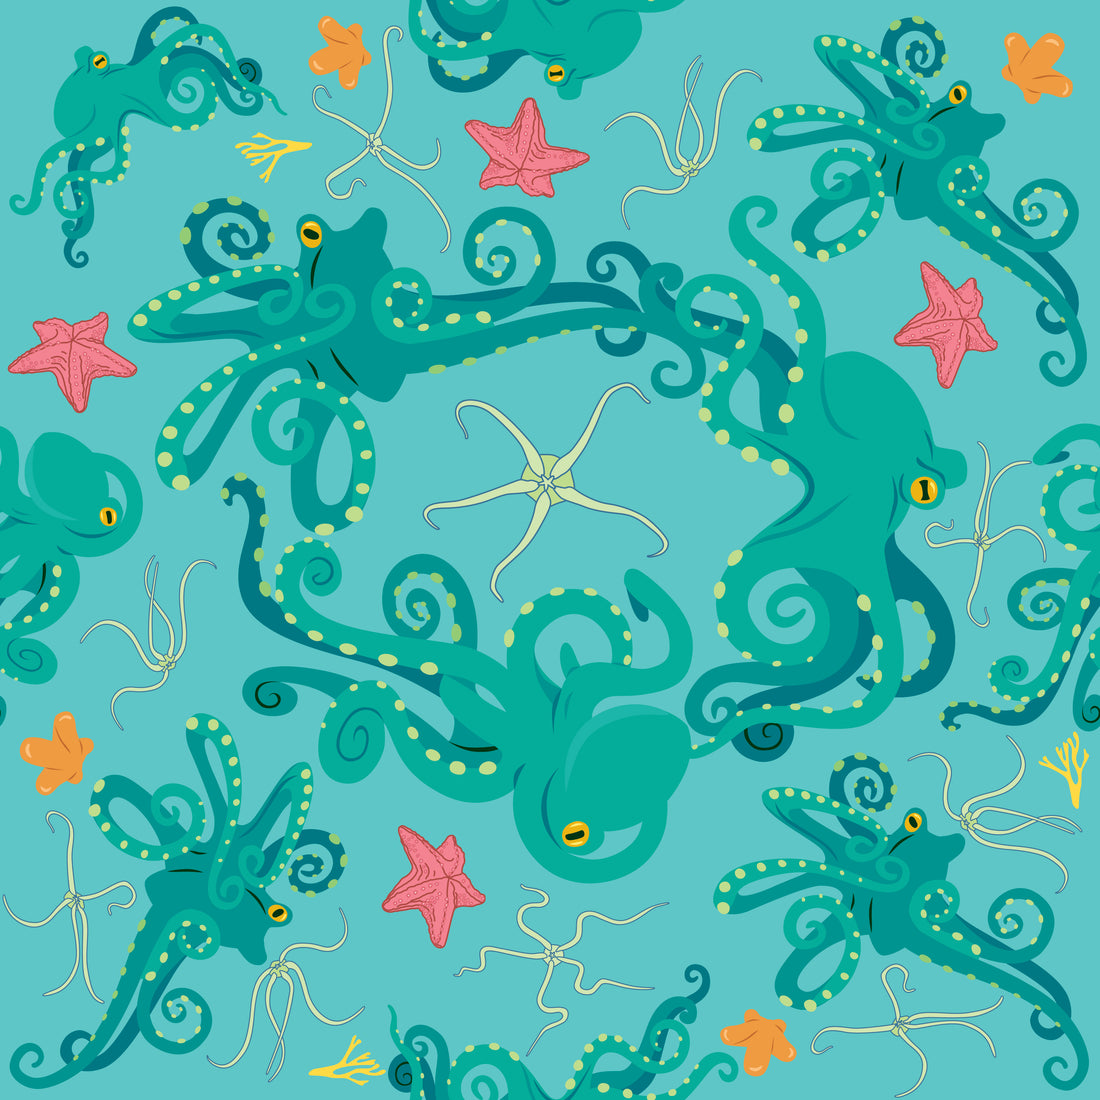 octopus illustration inspired by my octopus teacher. dancing octopus. an octopus garden. #octopus #dancingoctopus #myoctopusteacher